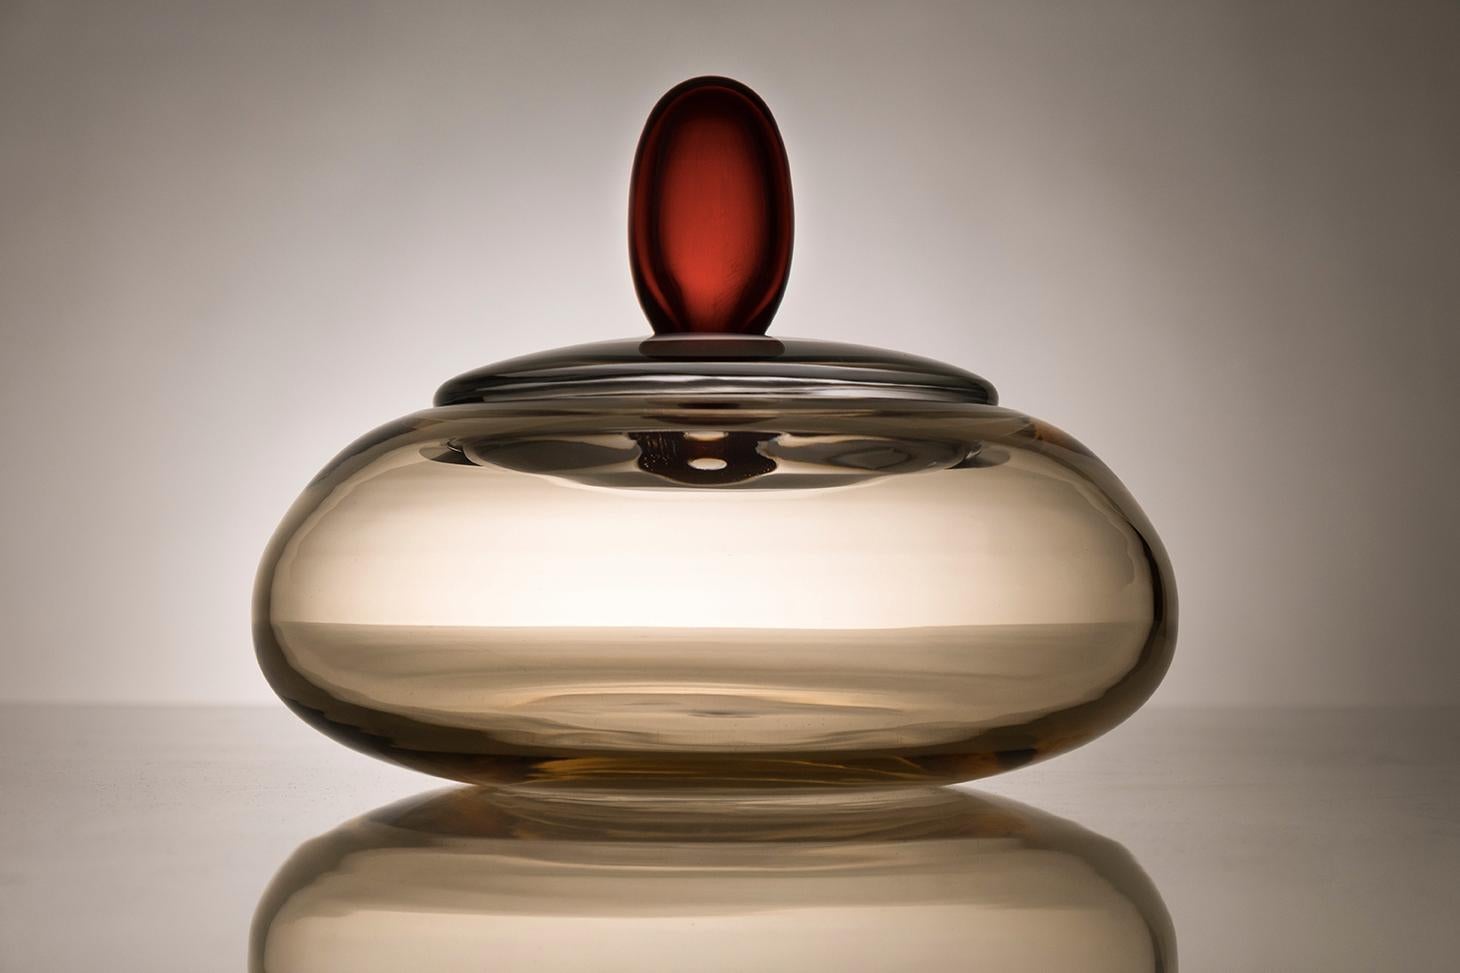 21st century Karim Rashid centerpiece container Murano glass various colors.
Designed by Karim Rashid, Kountess is a stately, sculptural jar with a lid. Just like its twin model, Kount, Kountess can also have different uses, whether aesthetic,